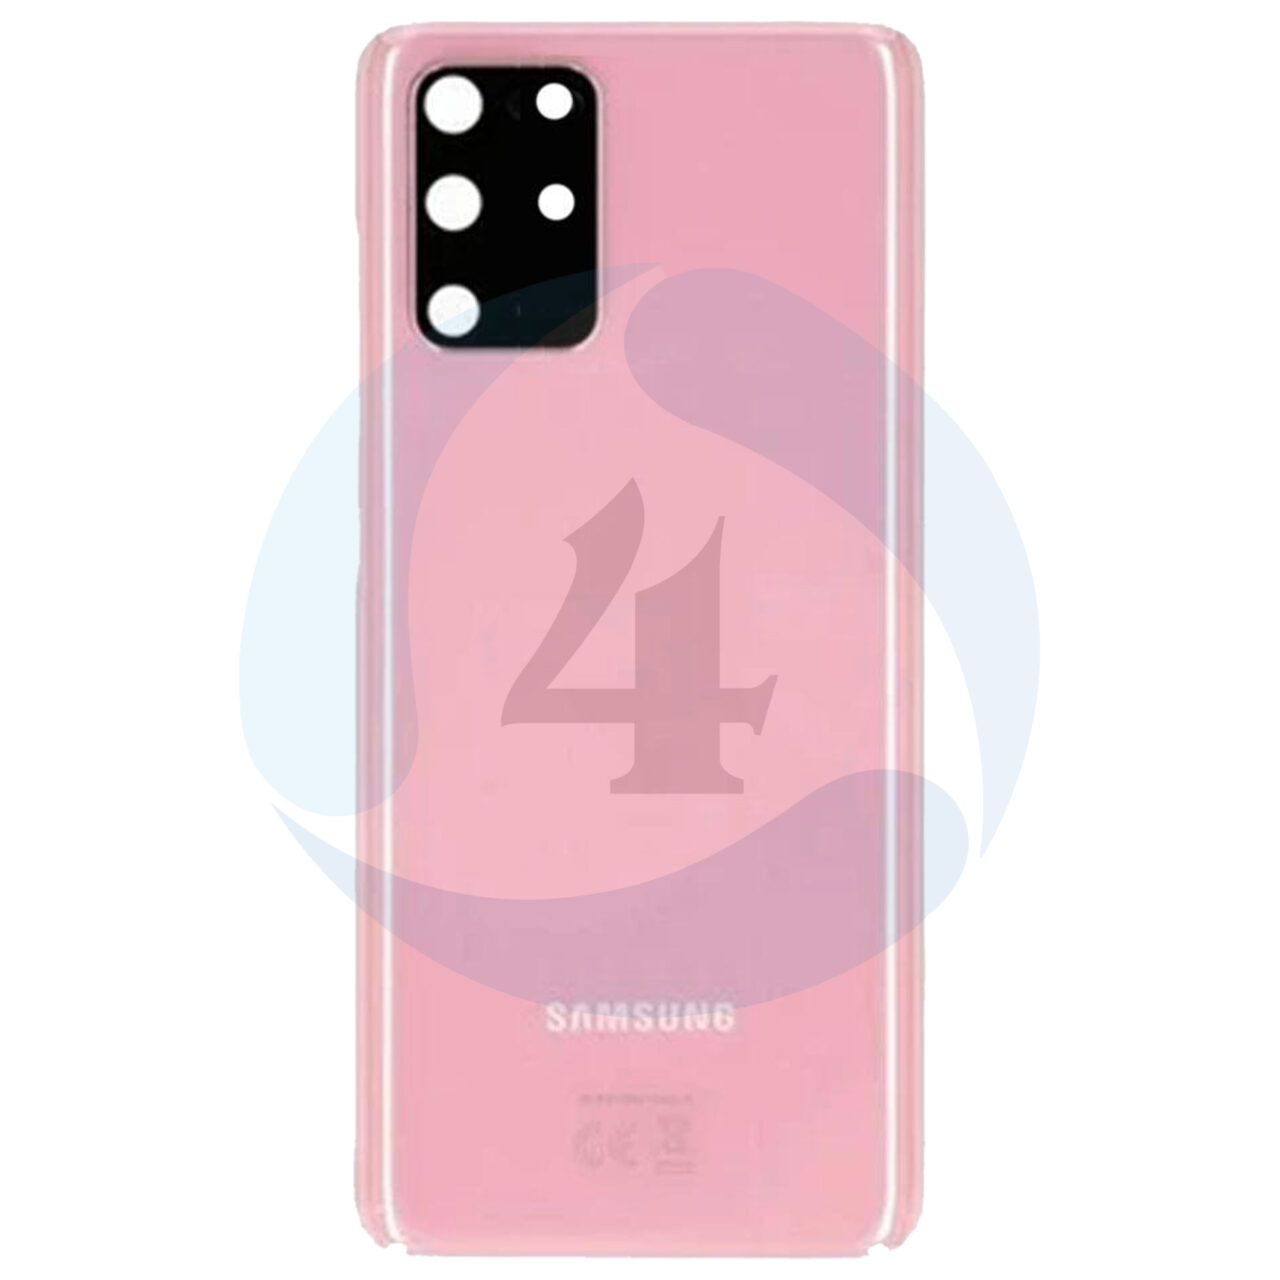 Samsung galaxy s20 plus rear battery cover including lens with adhesive cloud pink G985 G986